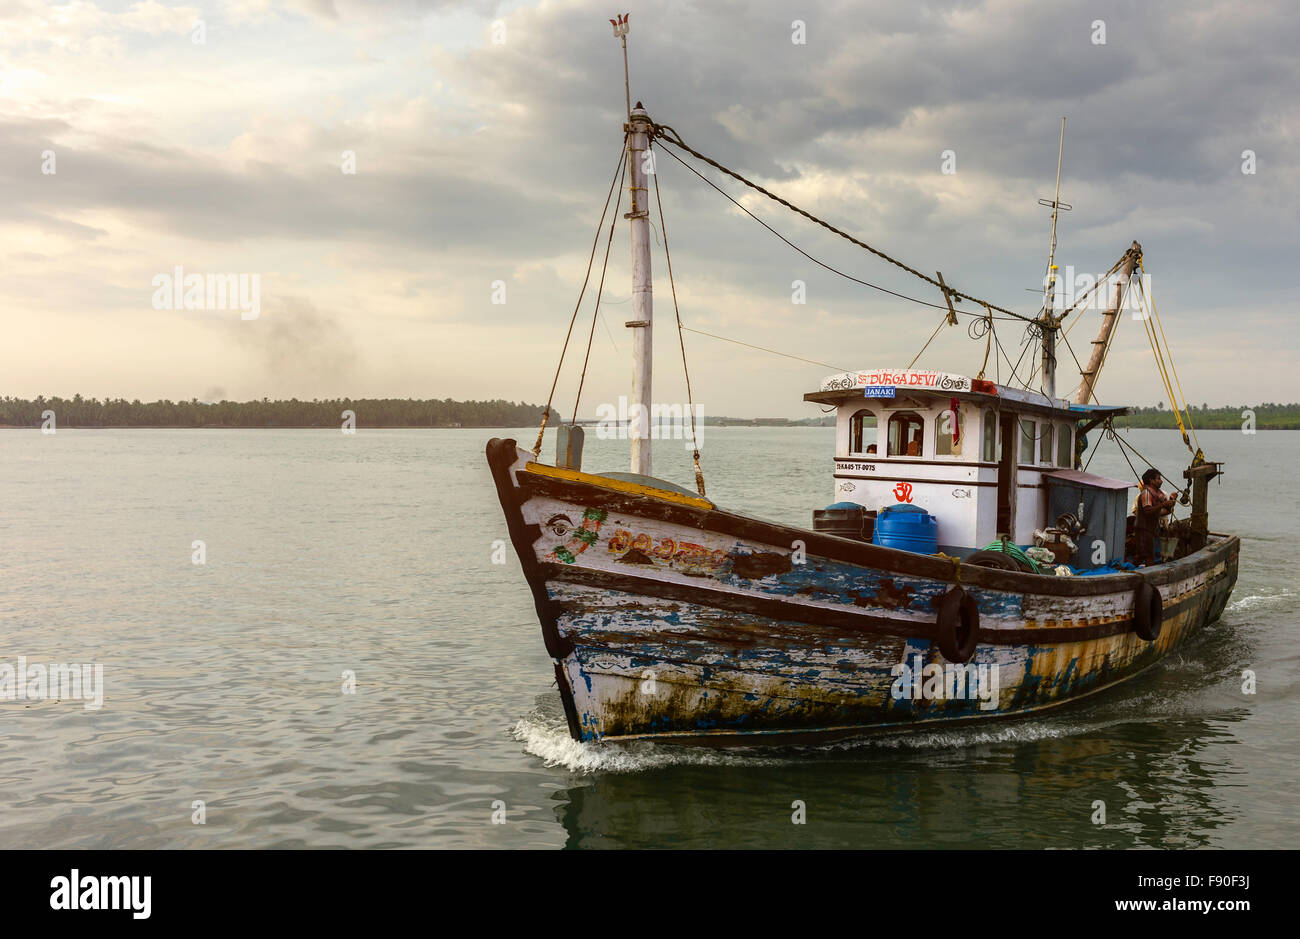 Trawler returns at dusk from deep sea fishing trip in Arabian Sea and anchor at Valapattam harbour, Kerala, India. Stock Photo